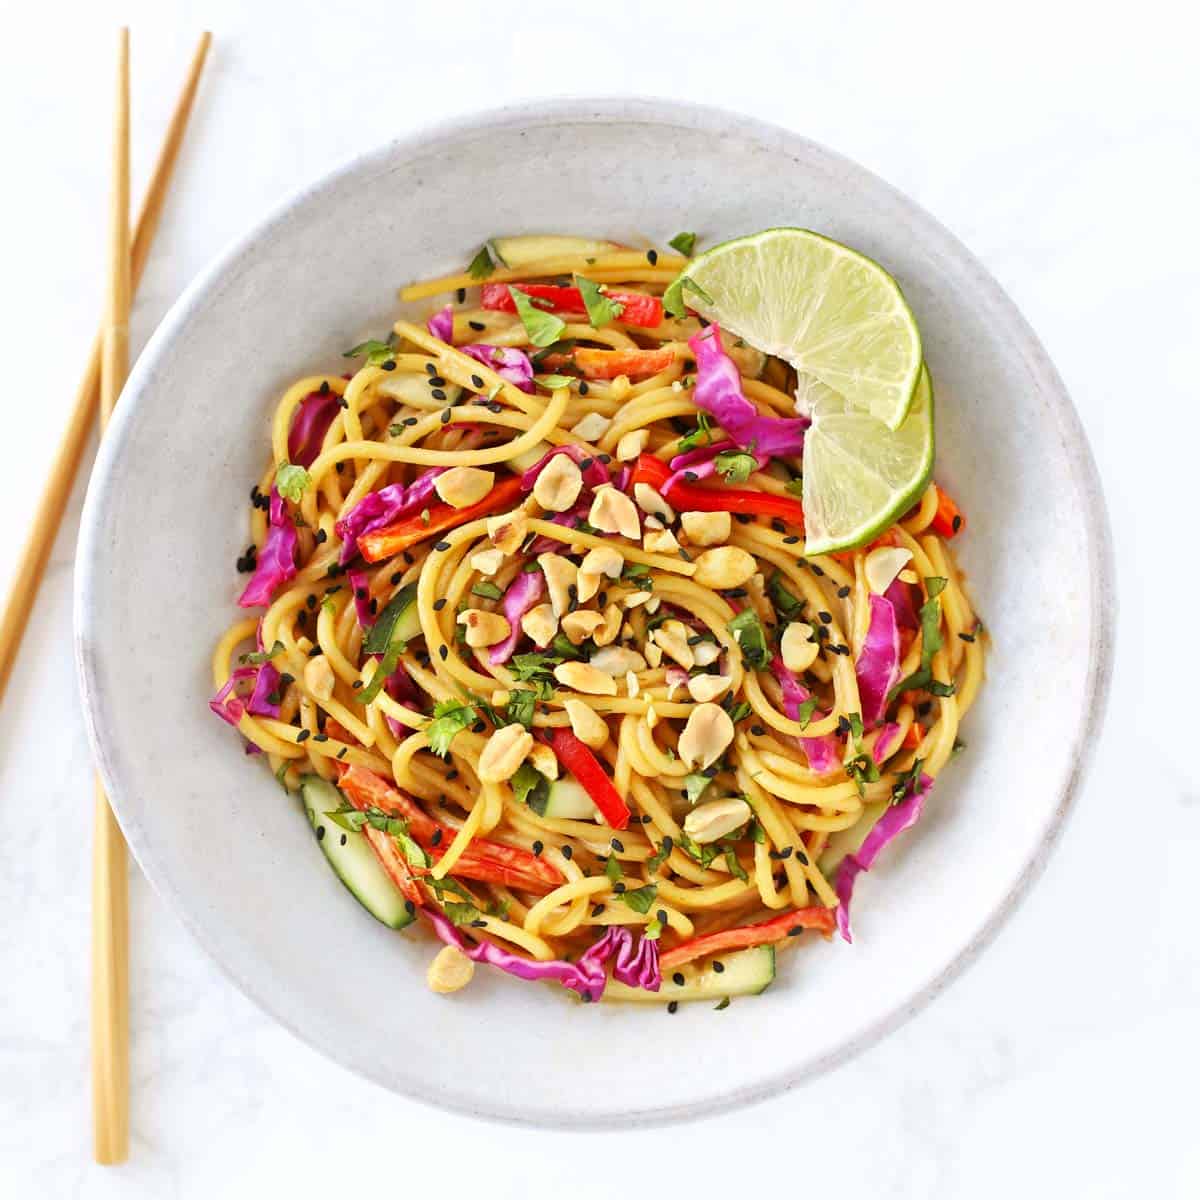 Cold Thai Noodle Salad with Peanut Dressing